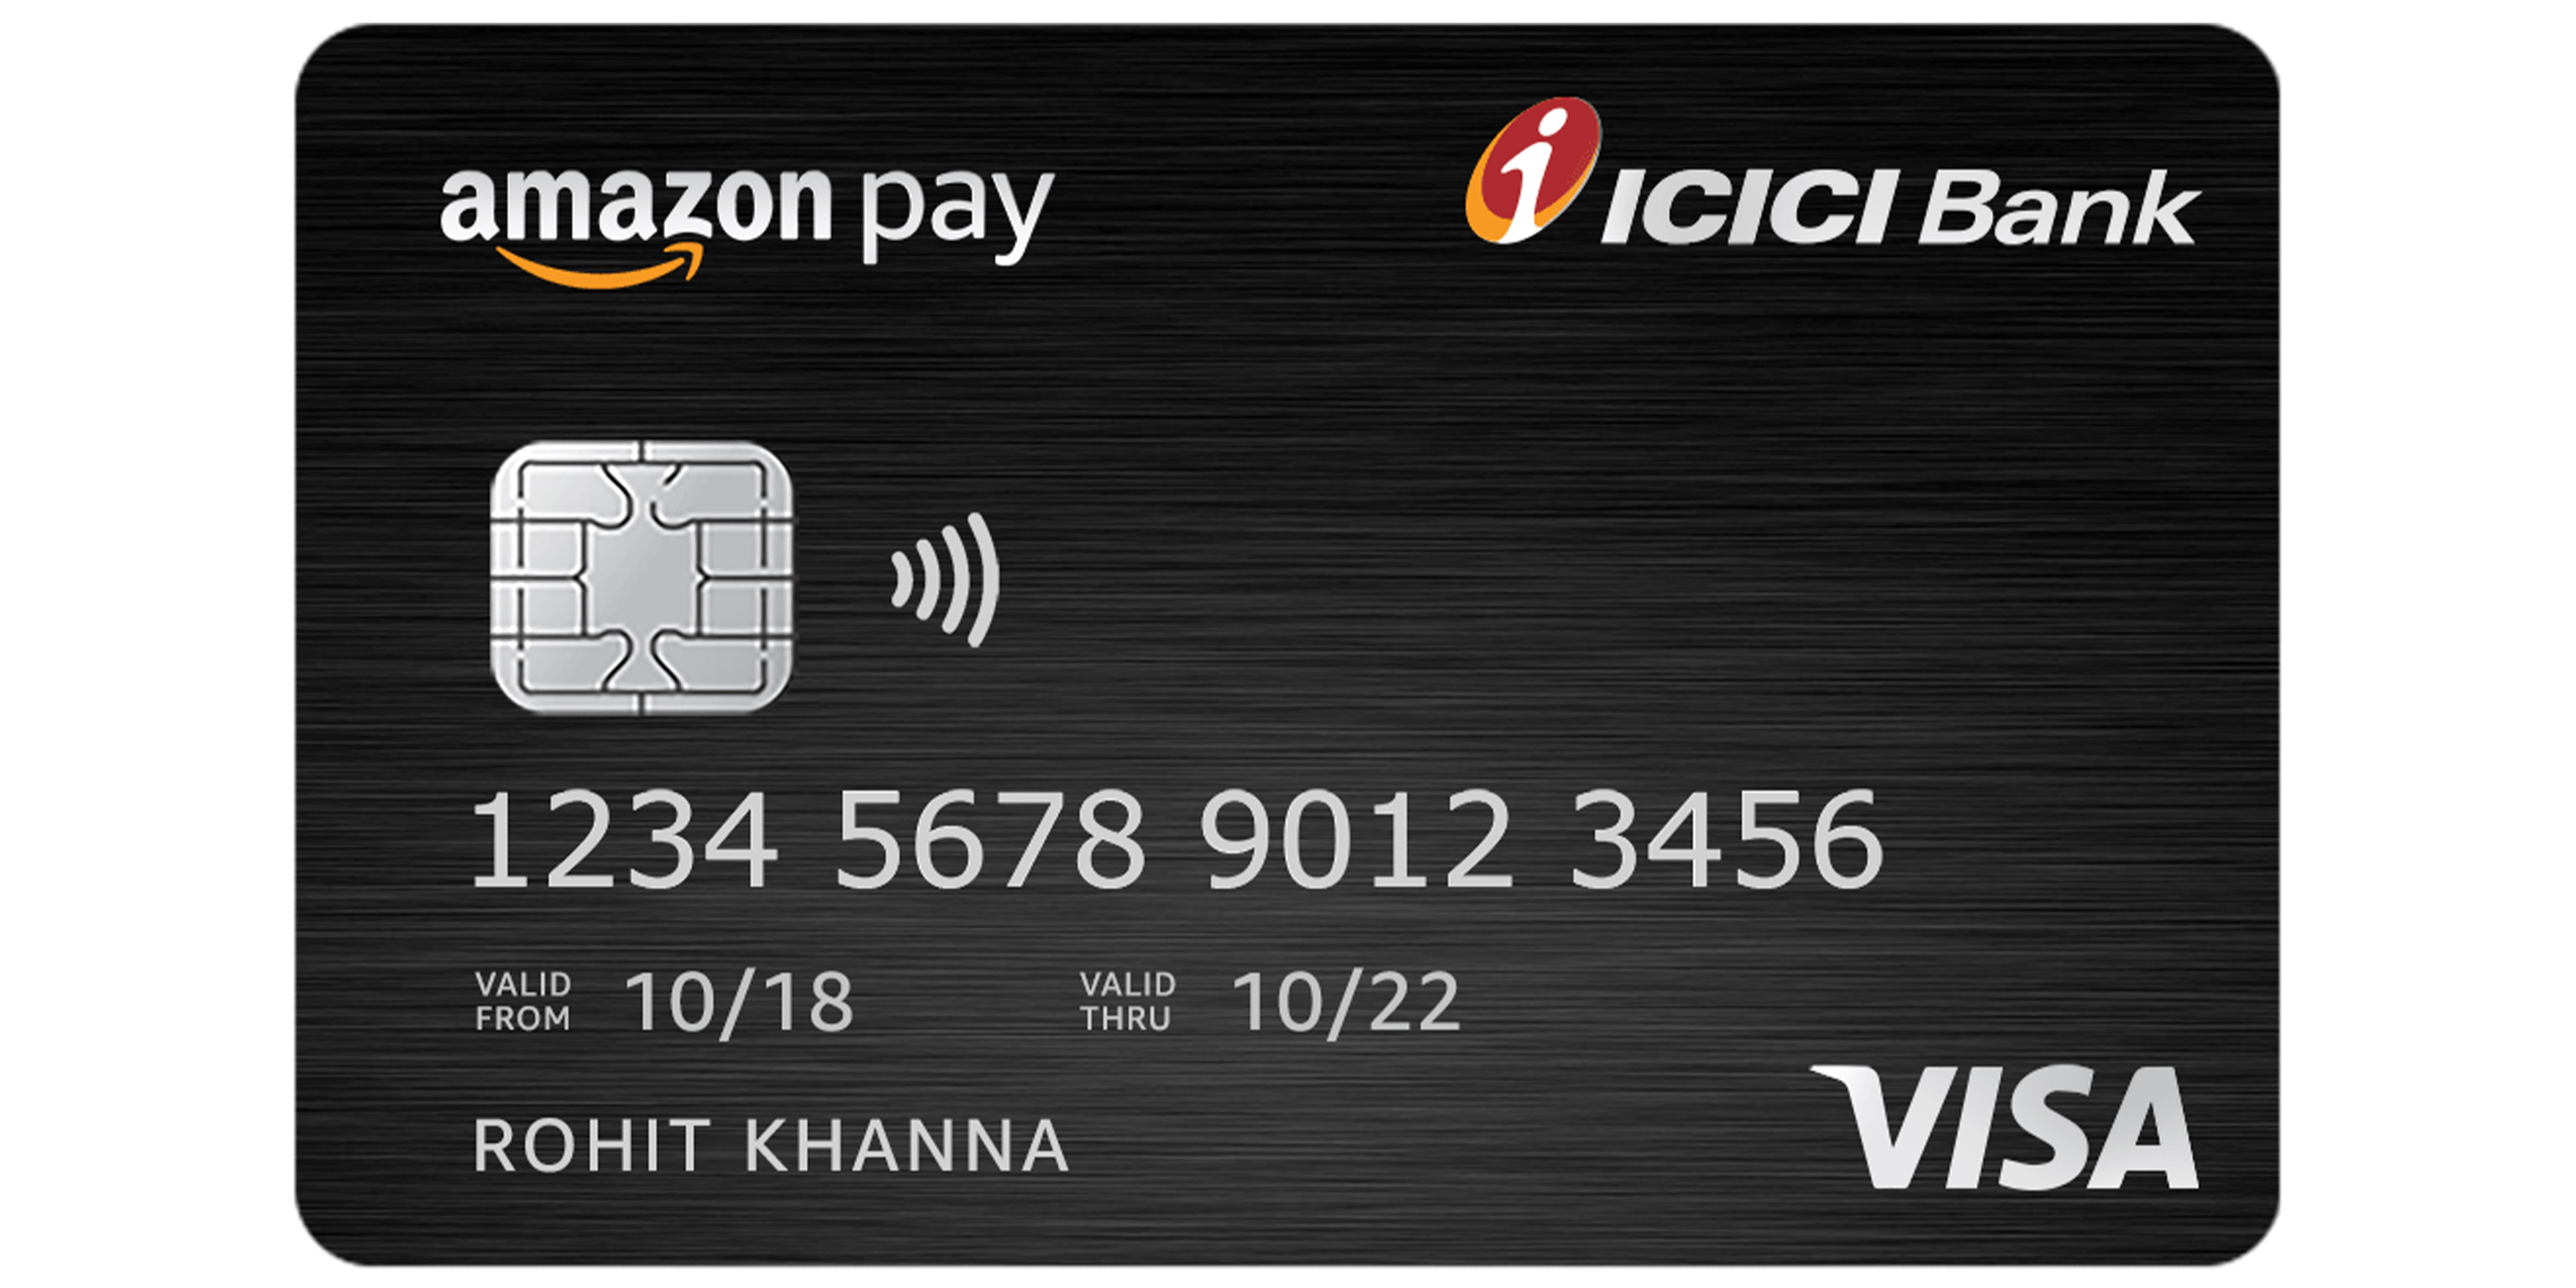 Amazon Pay ICICI credit card: Instant digital credit card with unlimited  rewards - About Amazon India